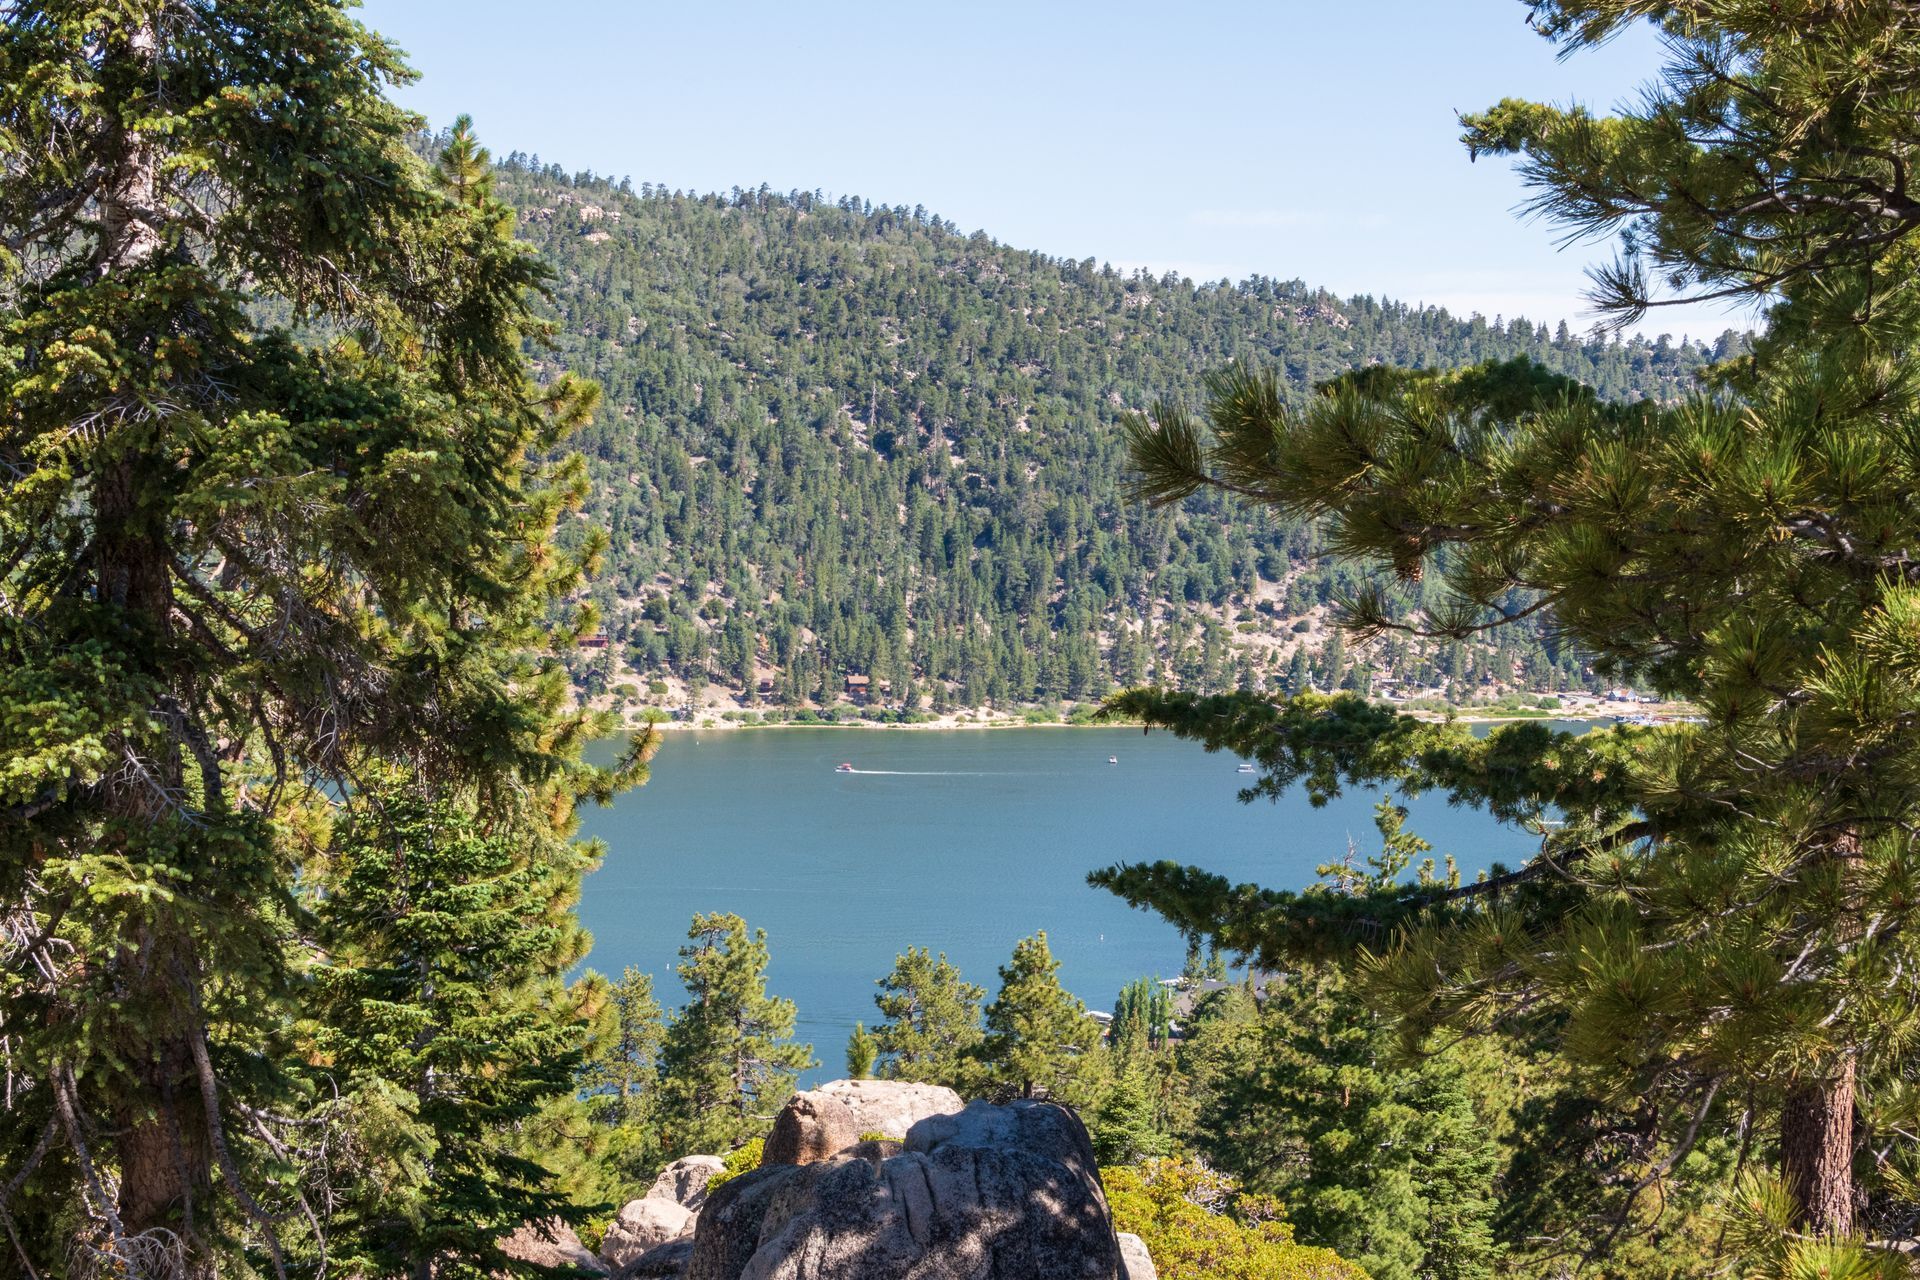 All You Need to Know About the Adventure Pass - Big Bear Lake